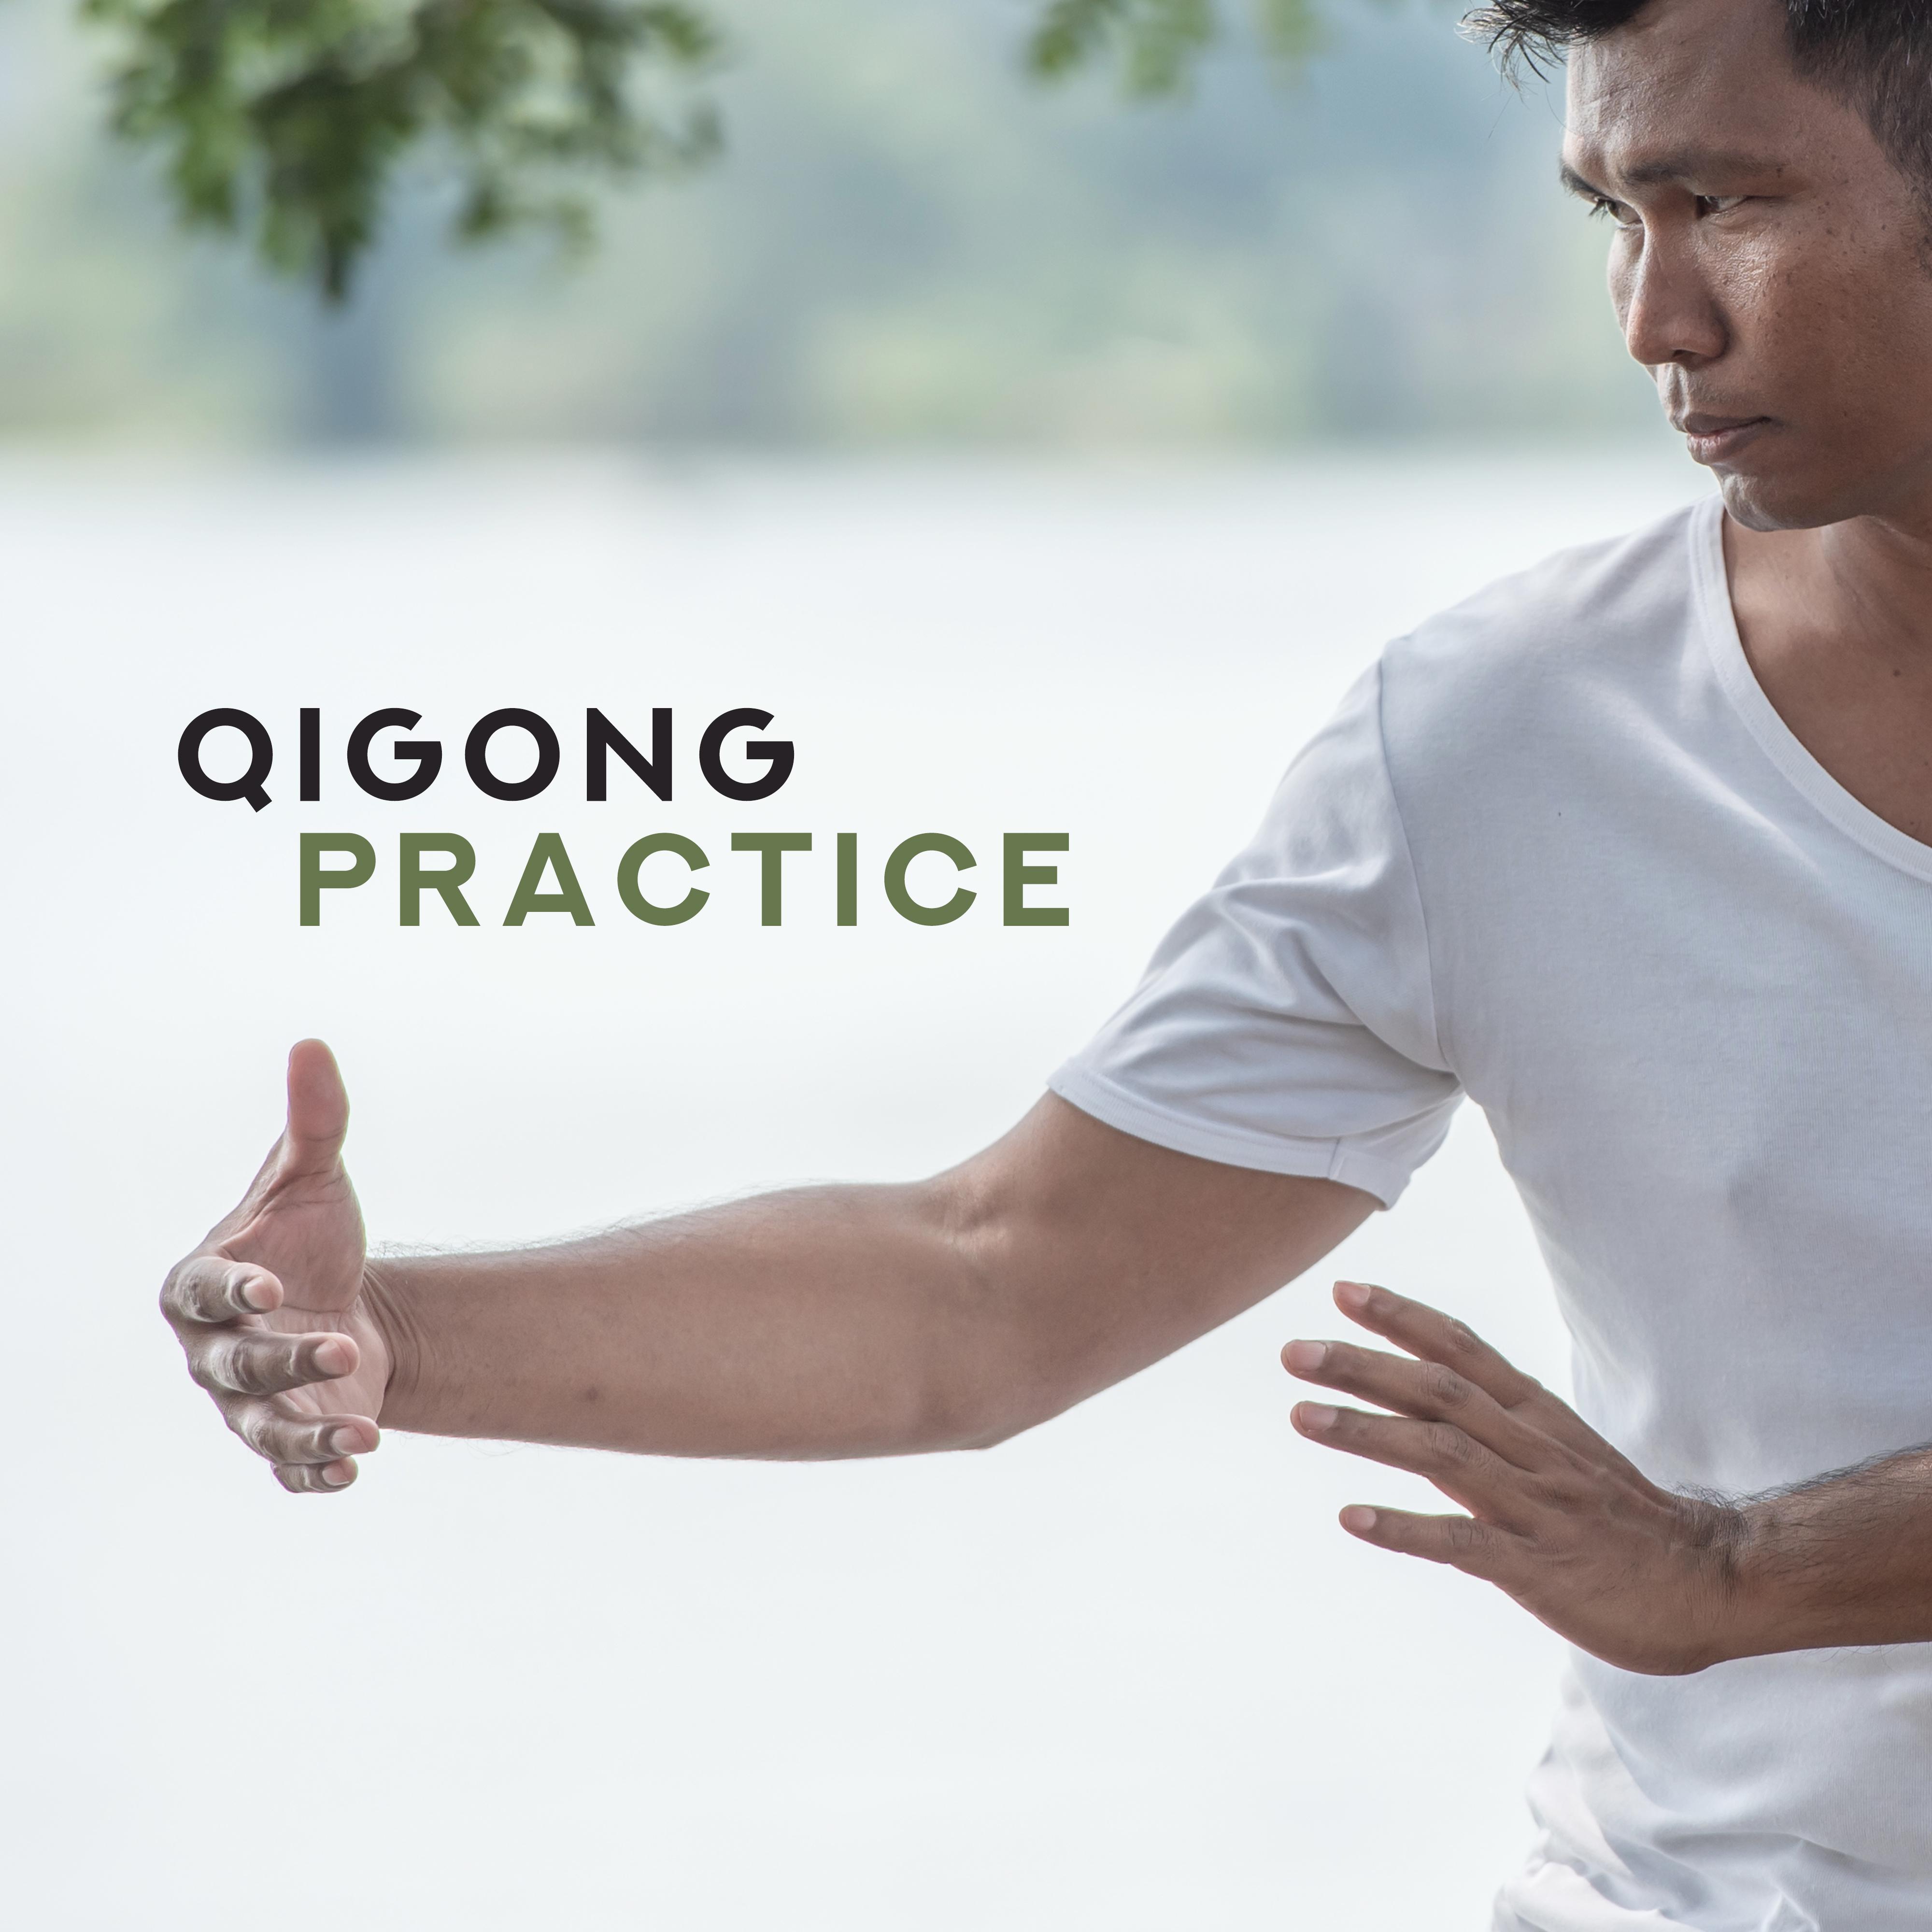 Qigong Practice (Energy of the Earth and the Cosmos) – Music for Meditation, Yoga and Martial Arts Training